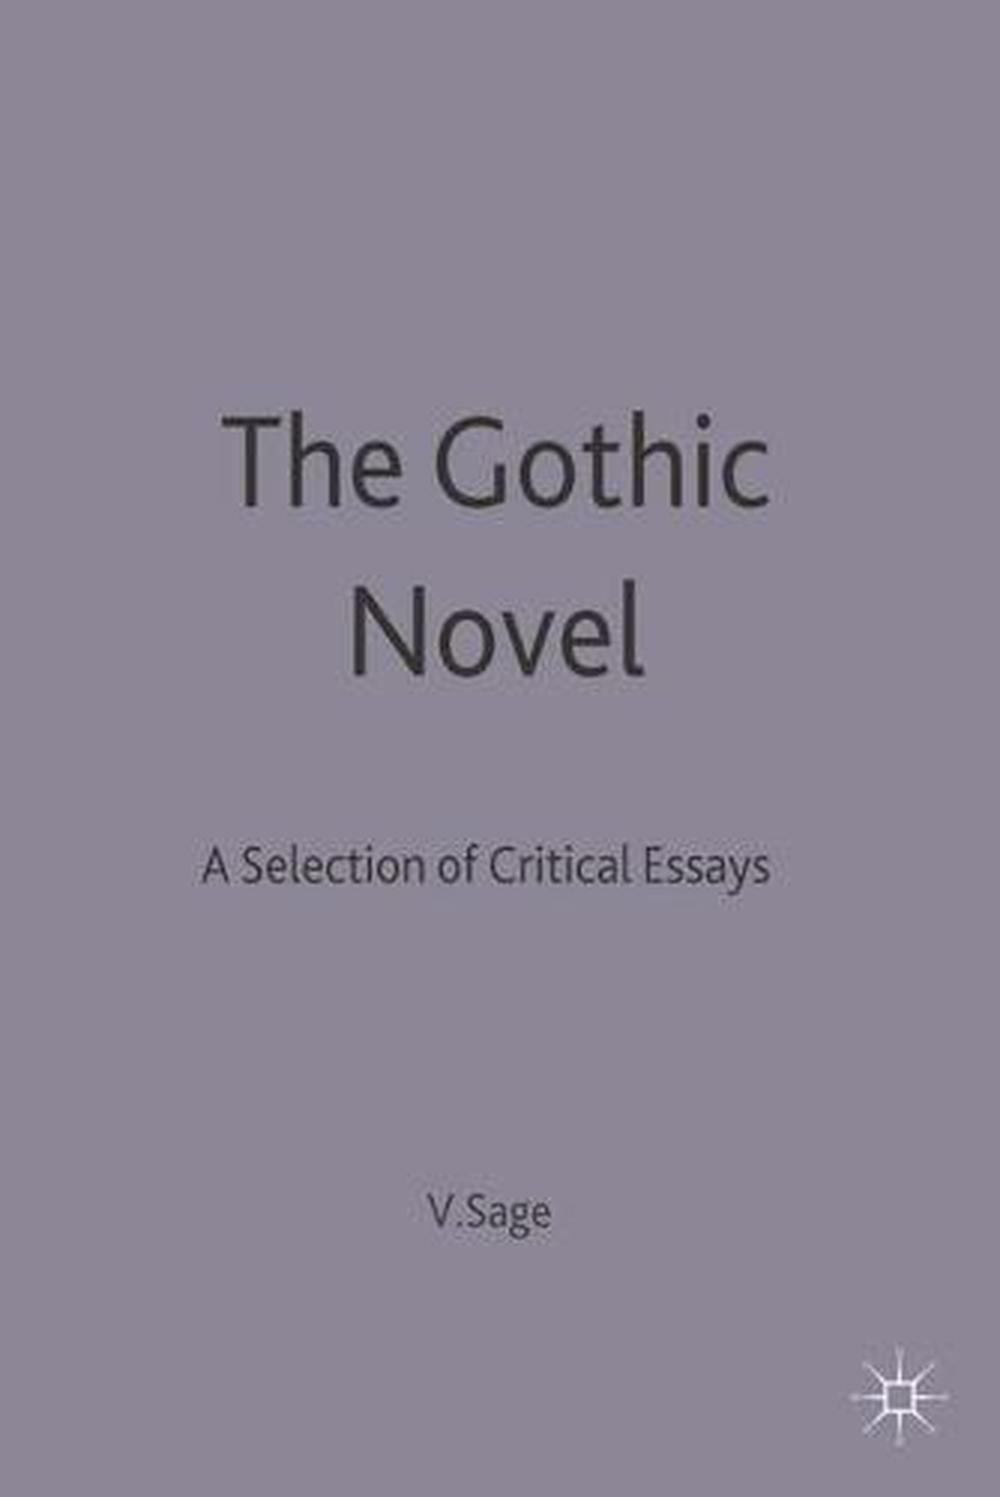 research paper on gothic novel